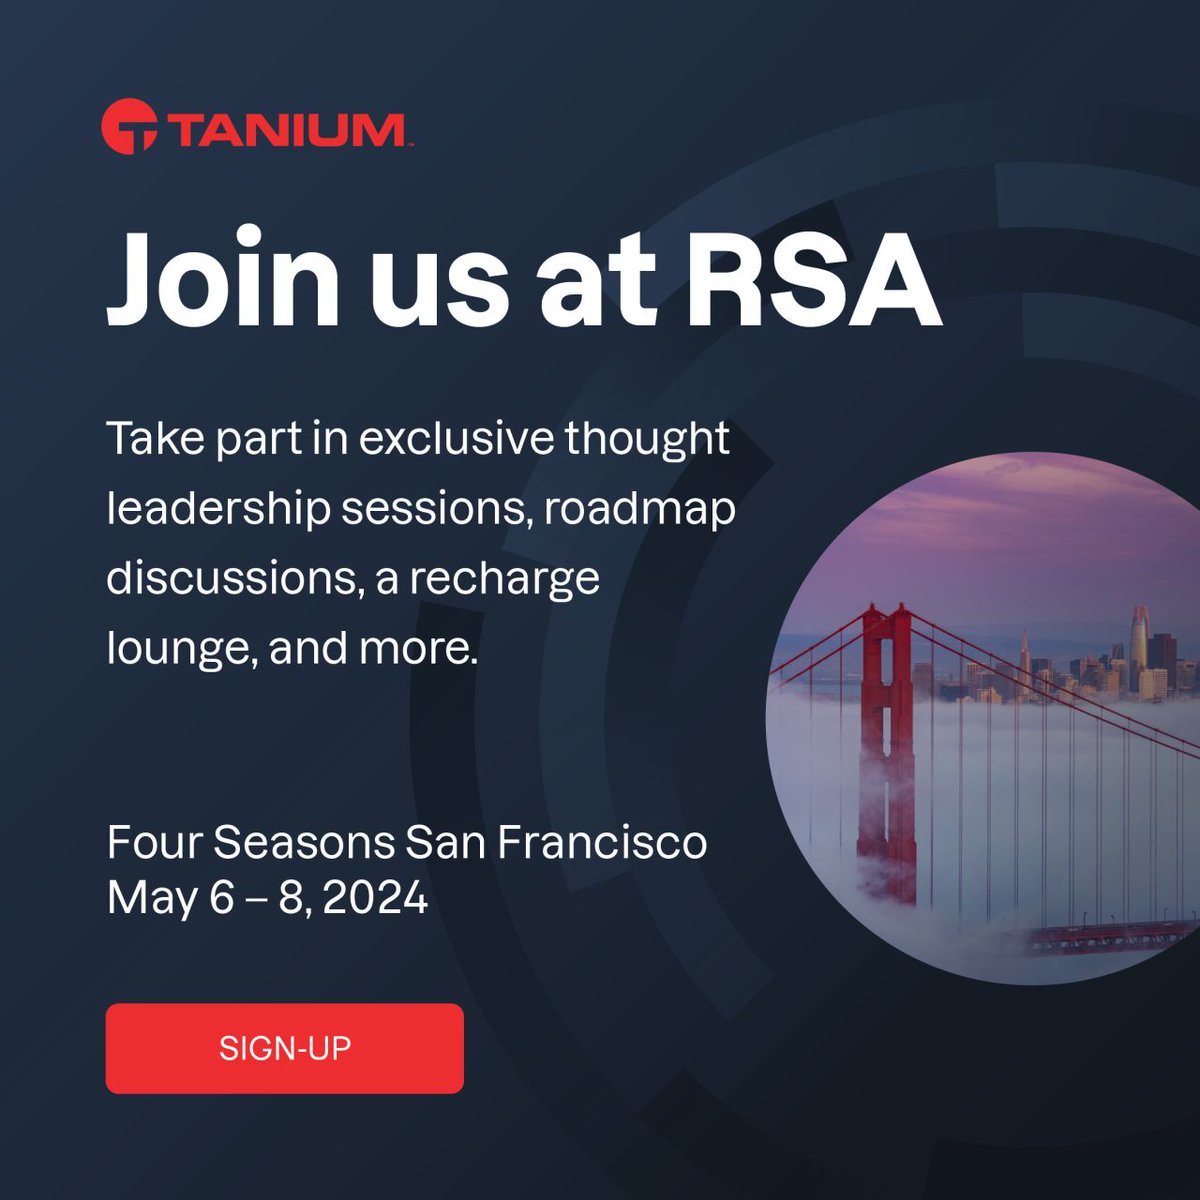 #RSAC is tomorrow! Join us at the Four Seasons San Francisco to meet with our on-site experts — and: 👂 Listen to exclusive thought leadership sessions 🛣️ Attended roadmap discussions 🪑 Stop by our recharge lounge Learn more: bit.ly/3PMD72P